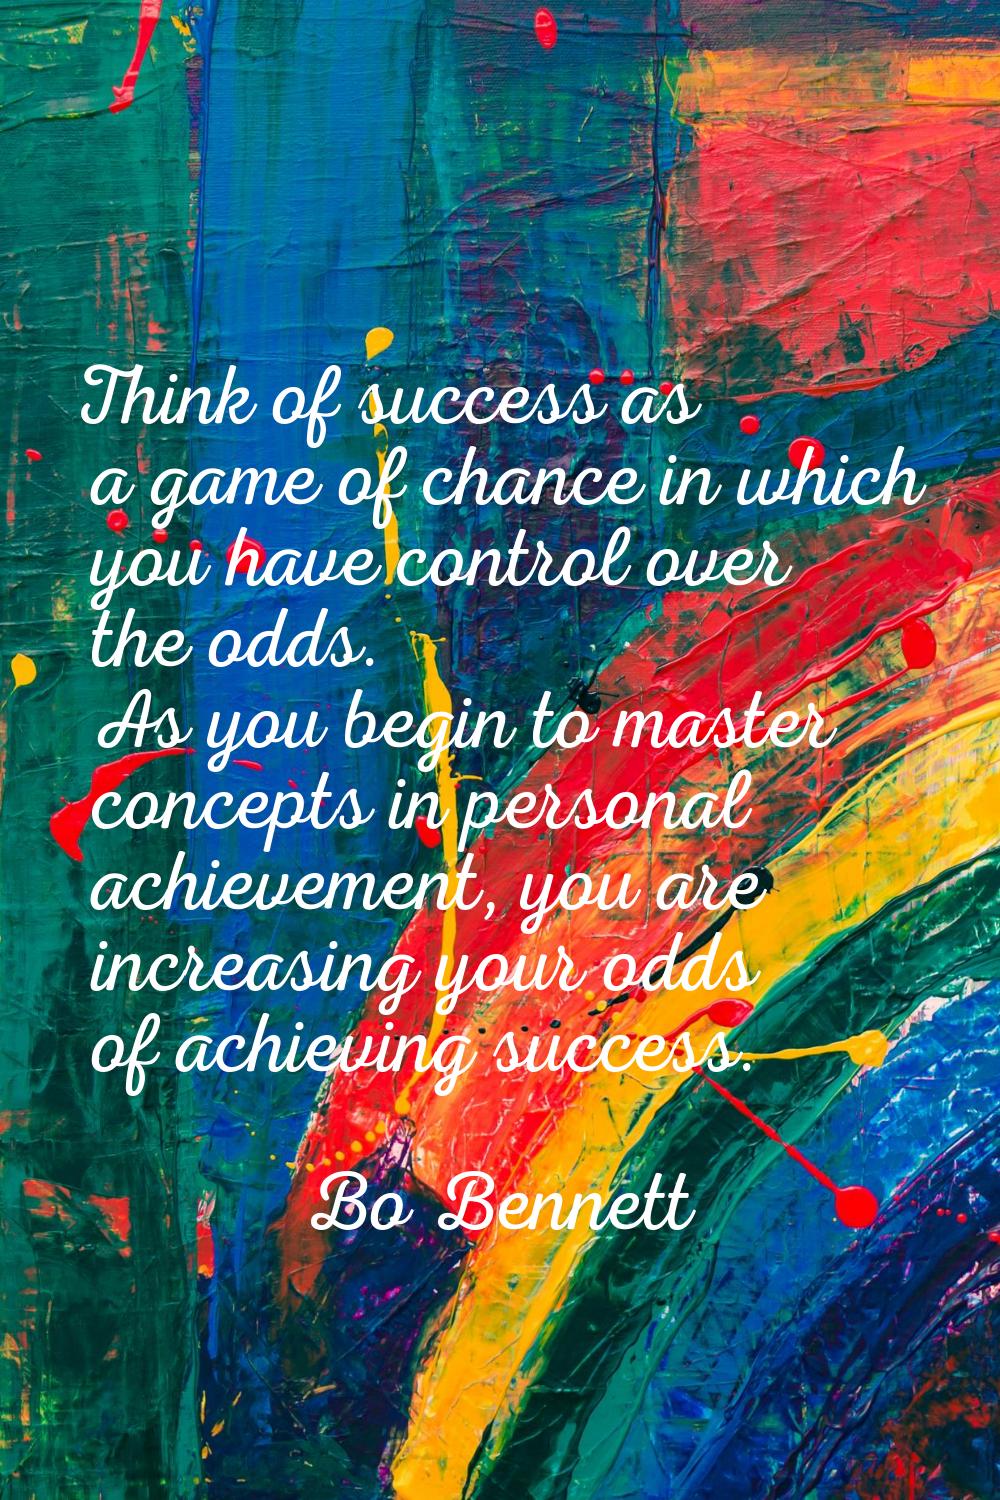 Think of success as a game of chance in which you have control over the odds. As you begin to maste